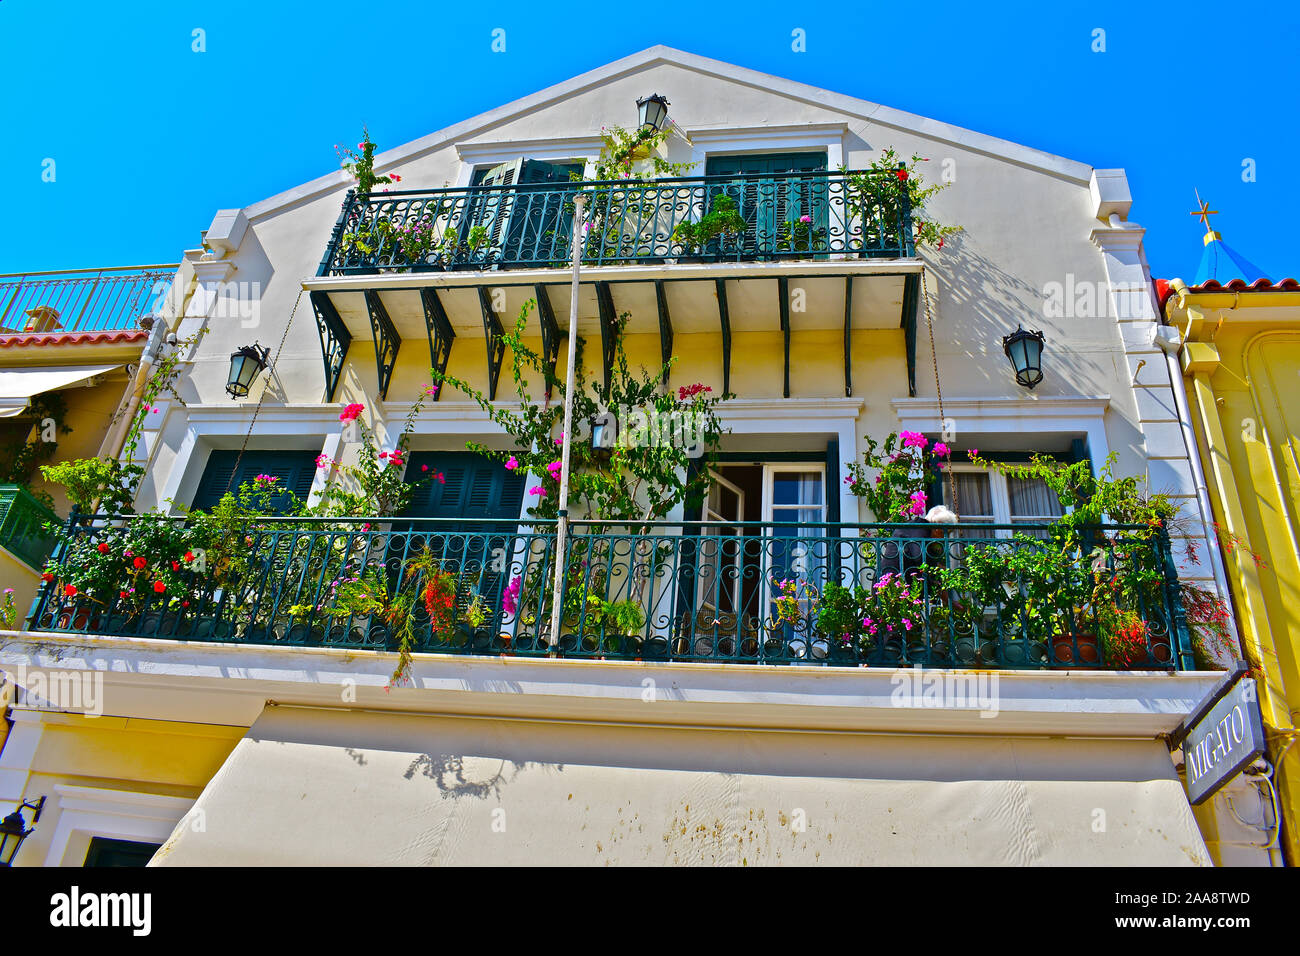 An old lady tending her flowers & plants on the balconies above the Migato  fashion shop in Lithostroto, the main street in the centre of Argostoli  Stock Photo - Alamy